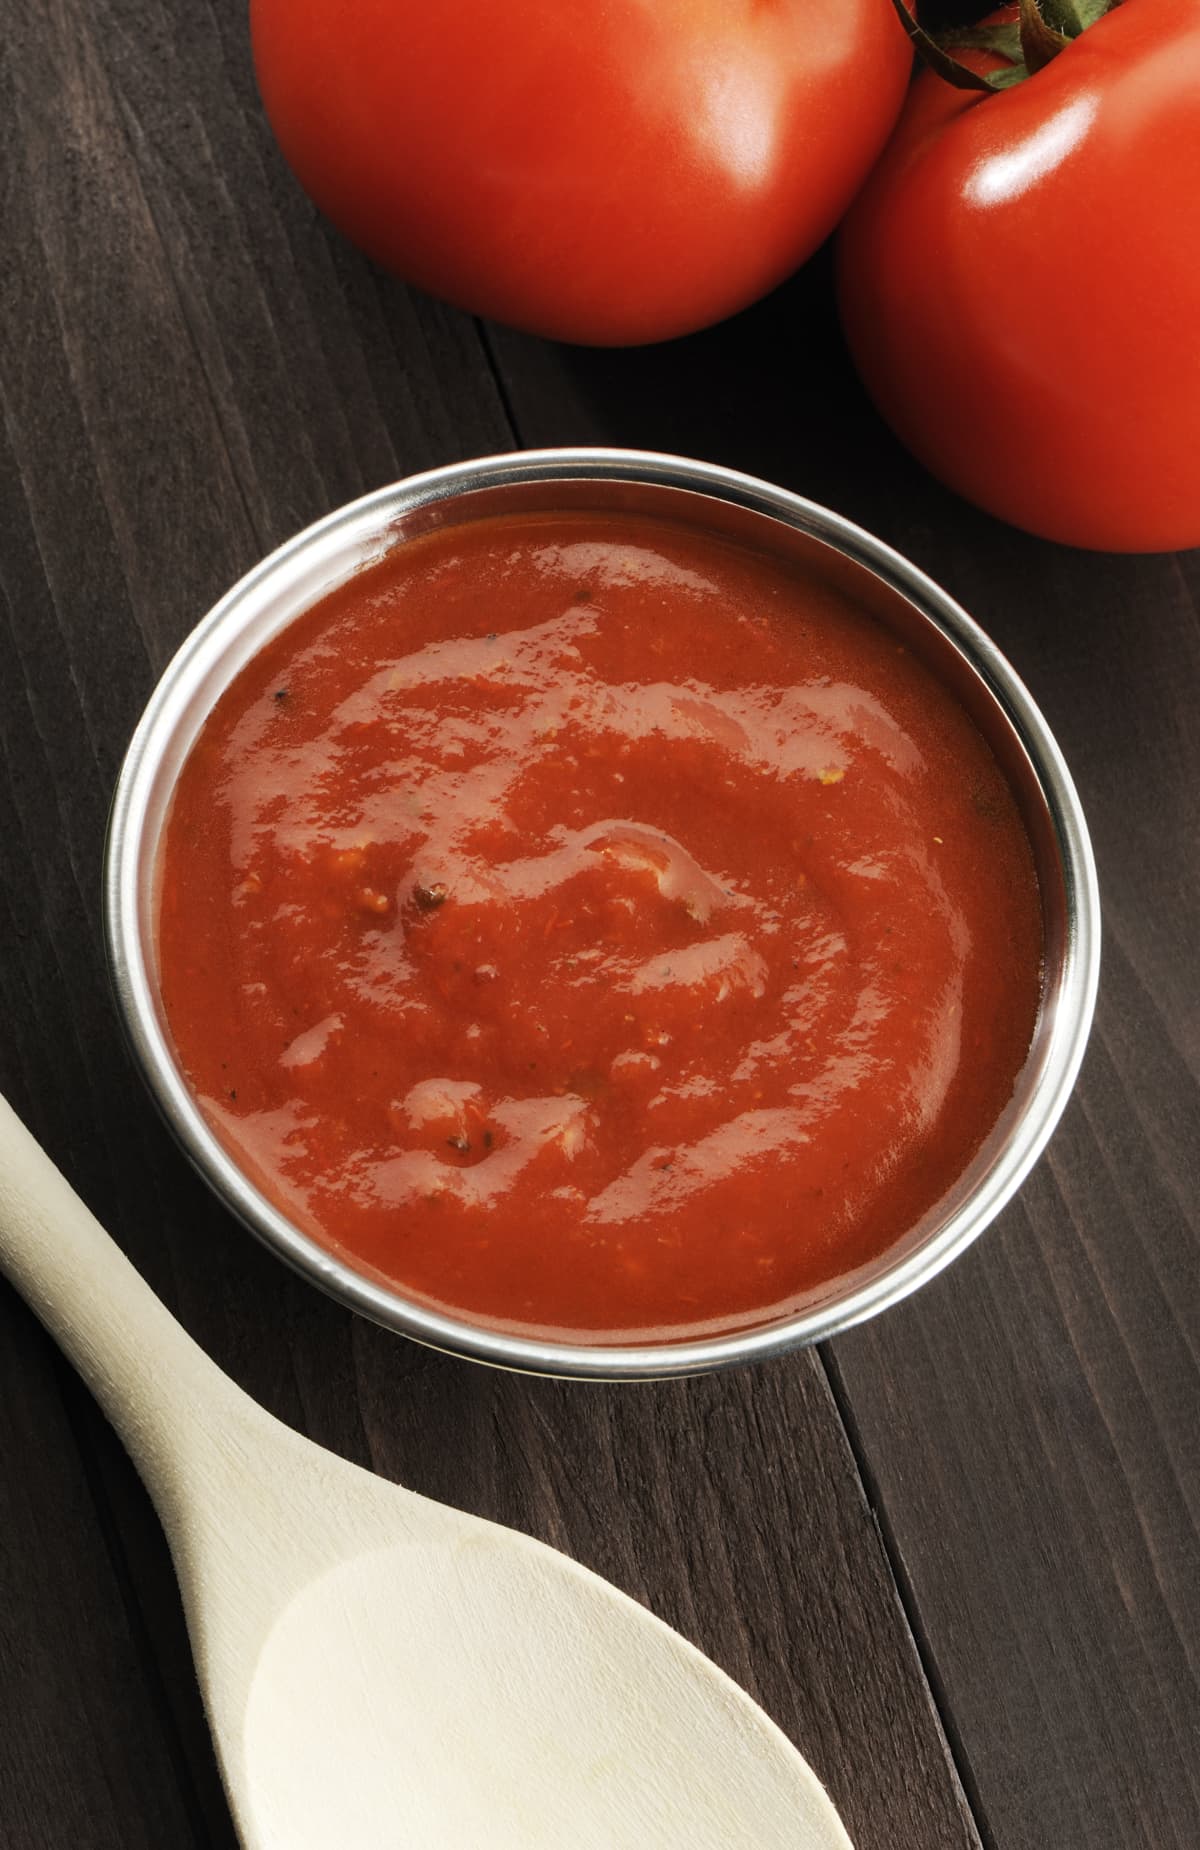 Bowl full of spicy tomato or marinara sauce with wooden spoon and tomatoes in background. More tomatoes in lightbox below...